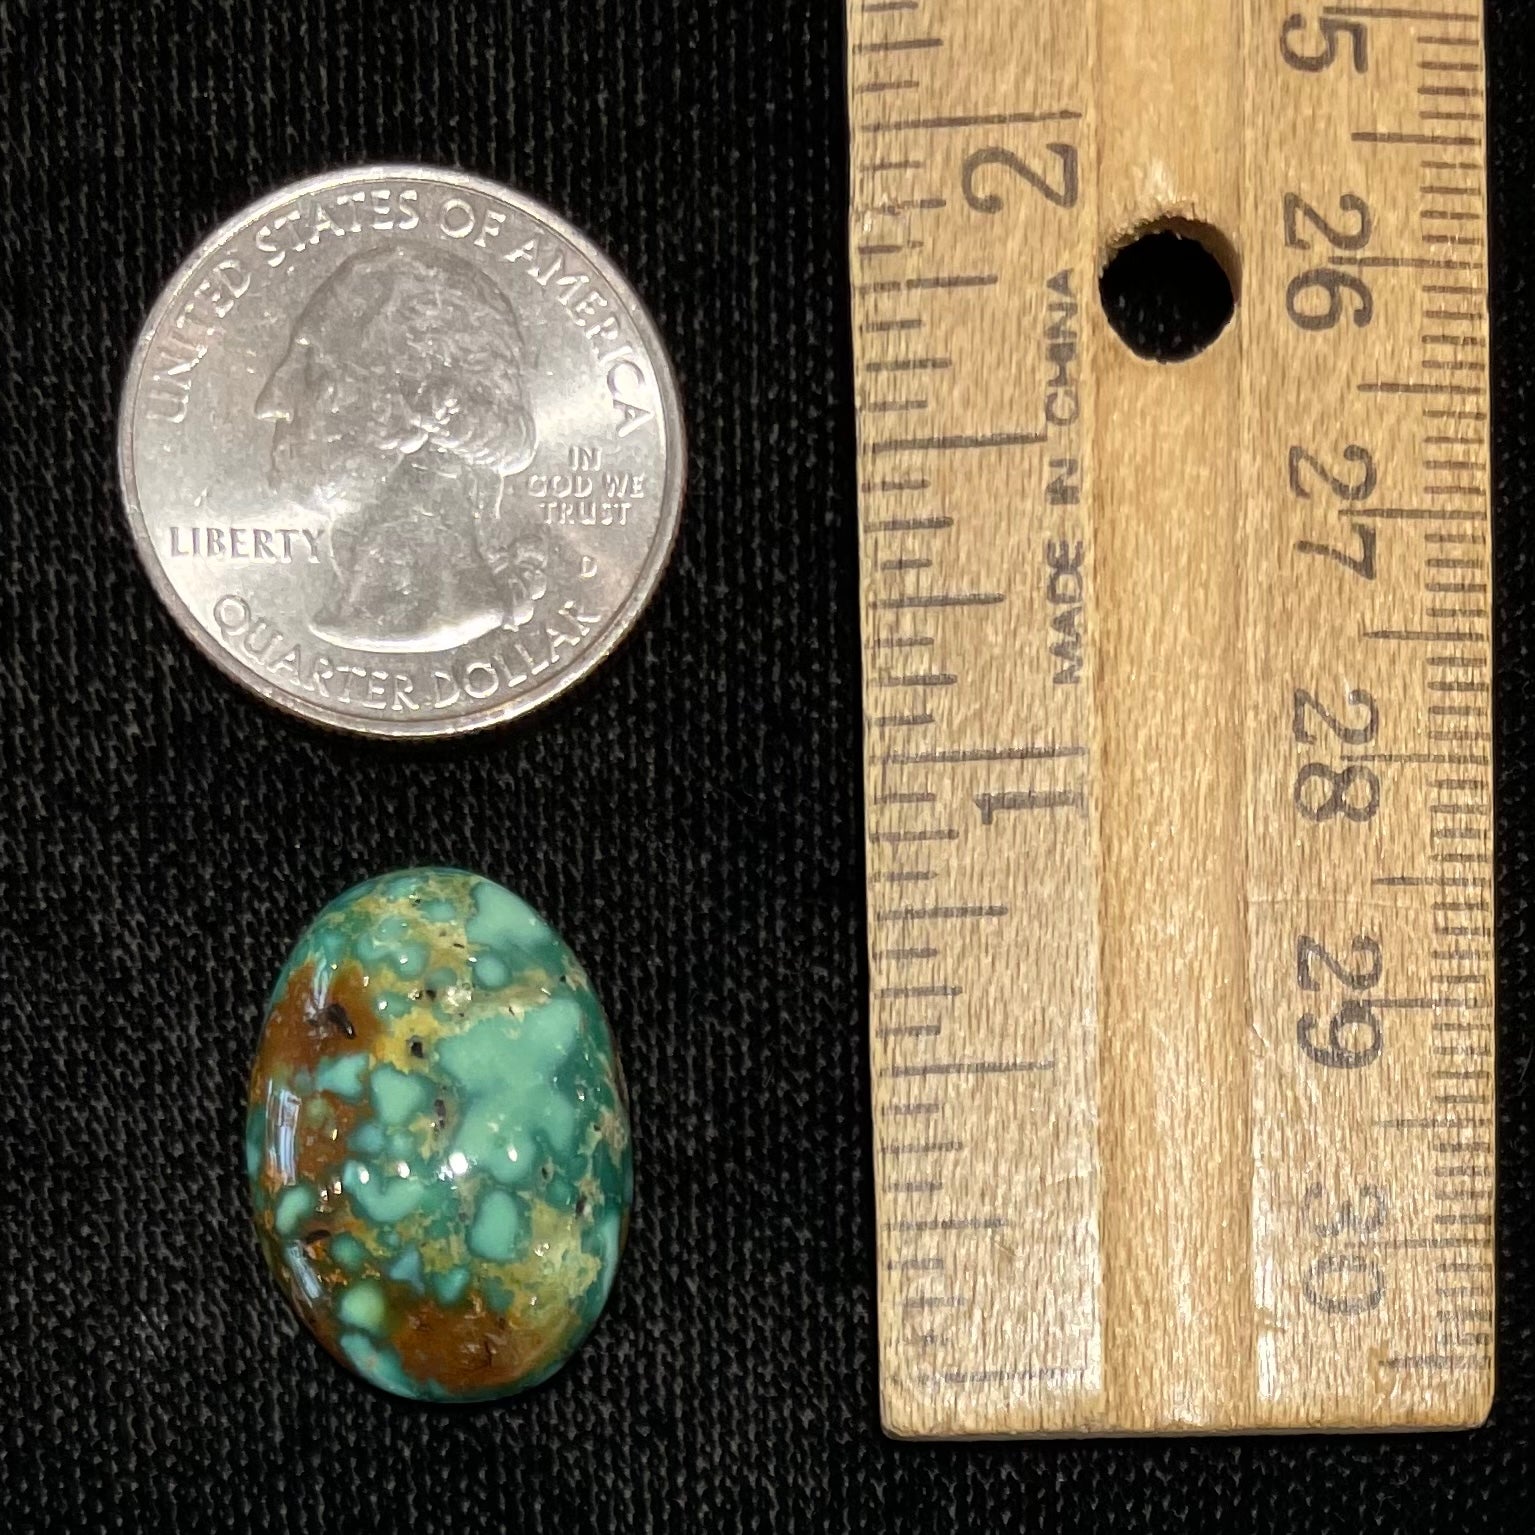 A loose, oval cabochon cut green and brown turquoise stone from Royston Mining District, Nevada.